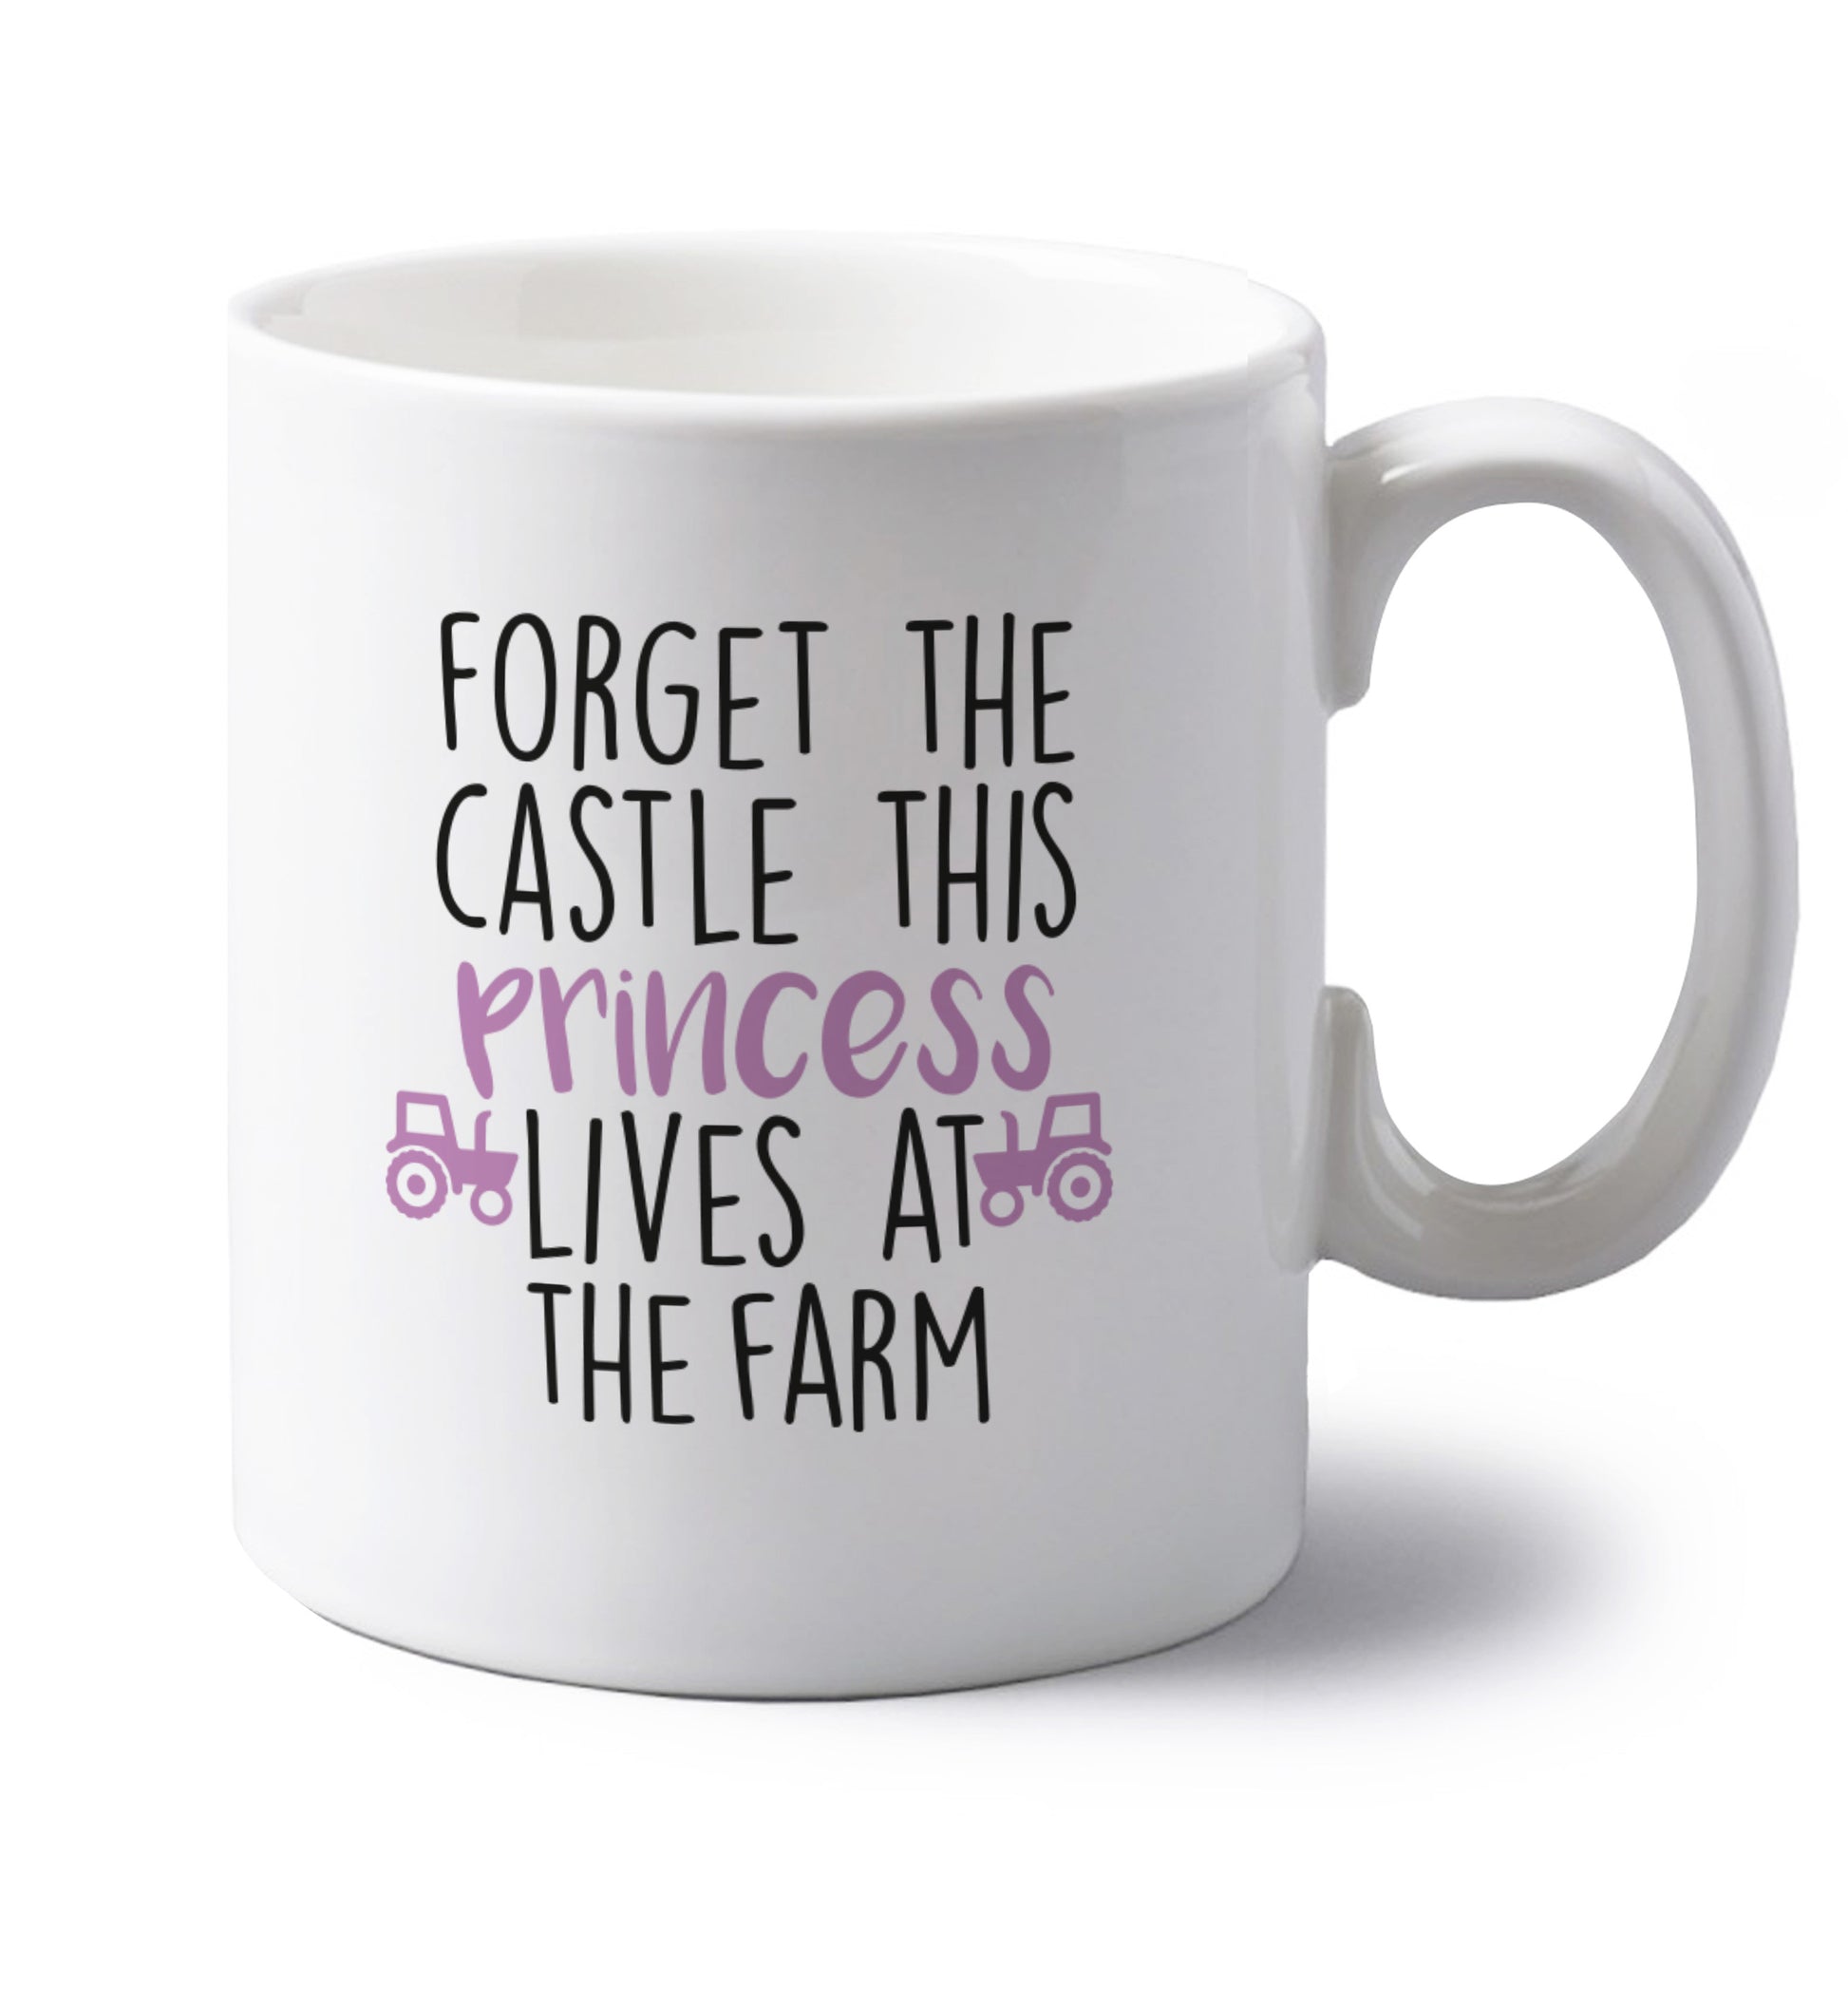 Forget the castle this princess lives at the farm left handed white ceramic mug 